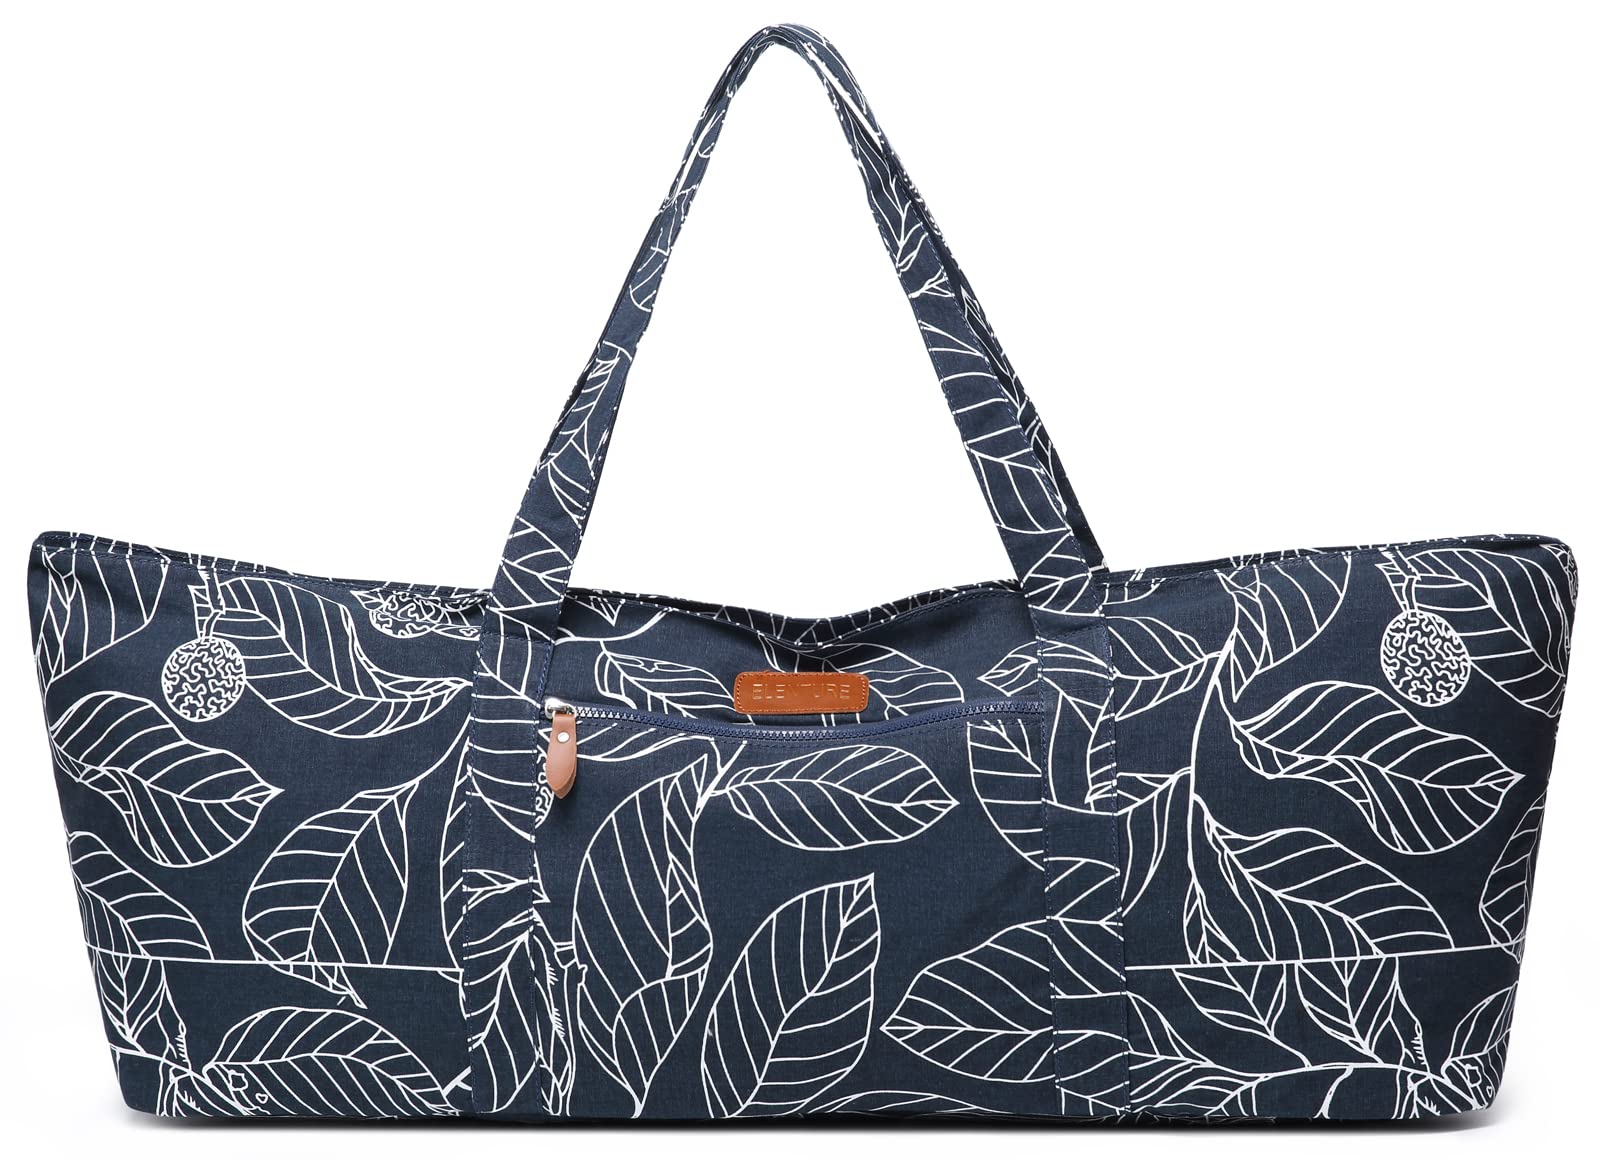 Will You Shell Out $20,000 For A Hermès Yoga Bag And Mat? - SHOUTS